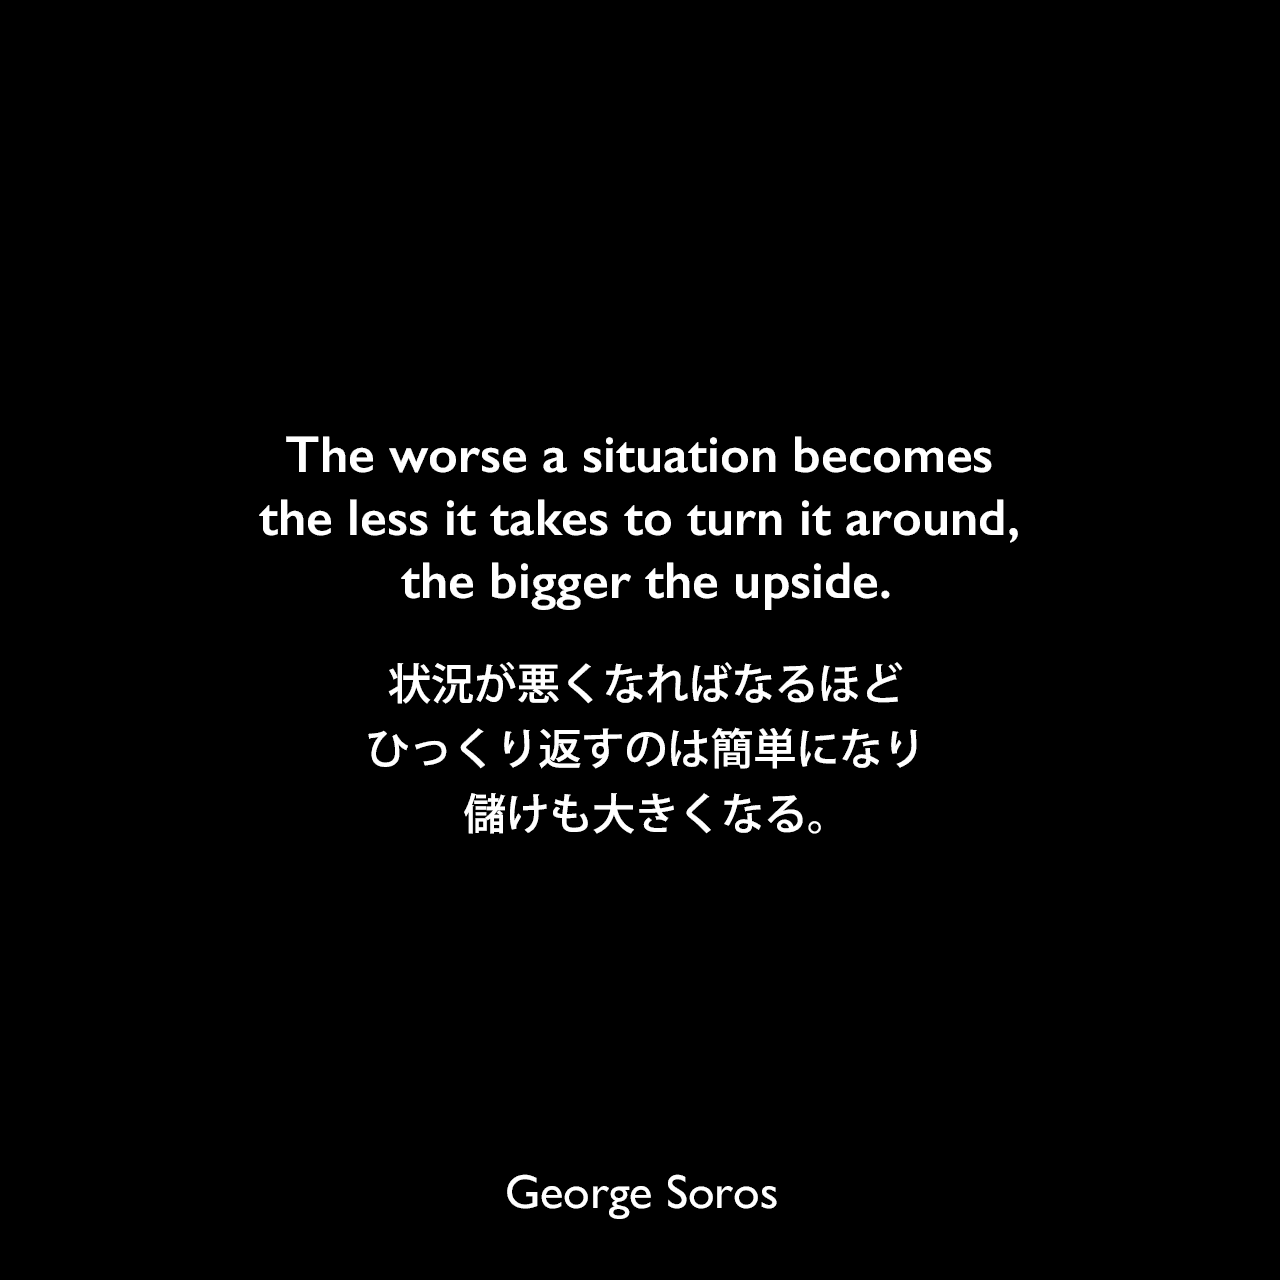 The worse a situation becomes the less it takes to turn it around, the bigger the upside.状況が悪くなればなるほど、ひっくり返すのは簡単になり、儲けも大きくなる。George Soros